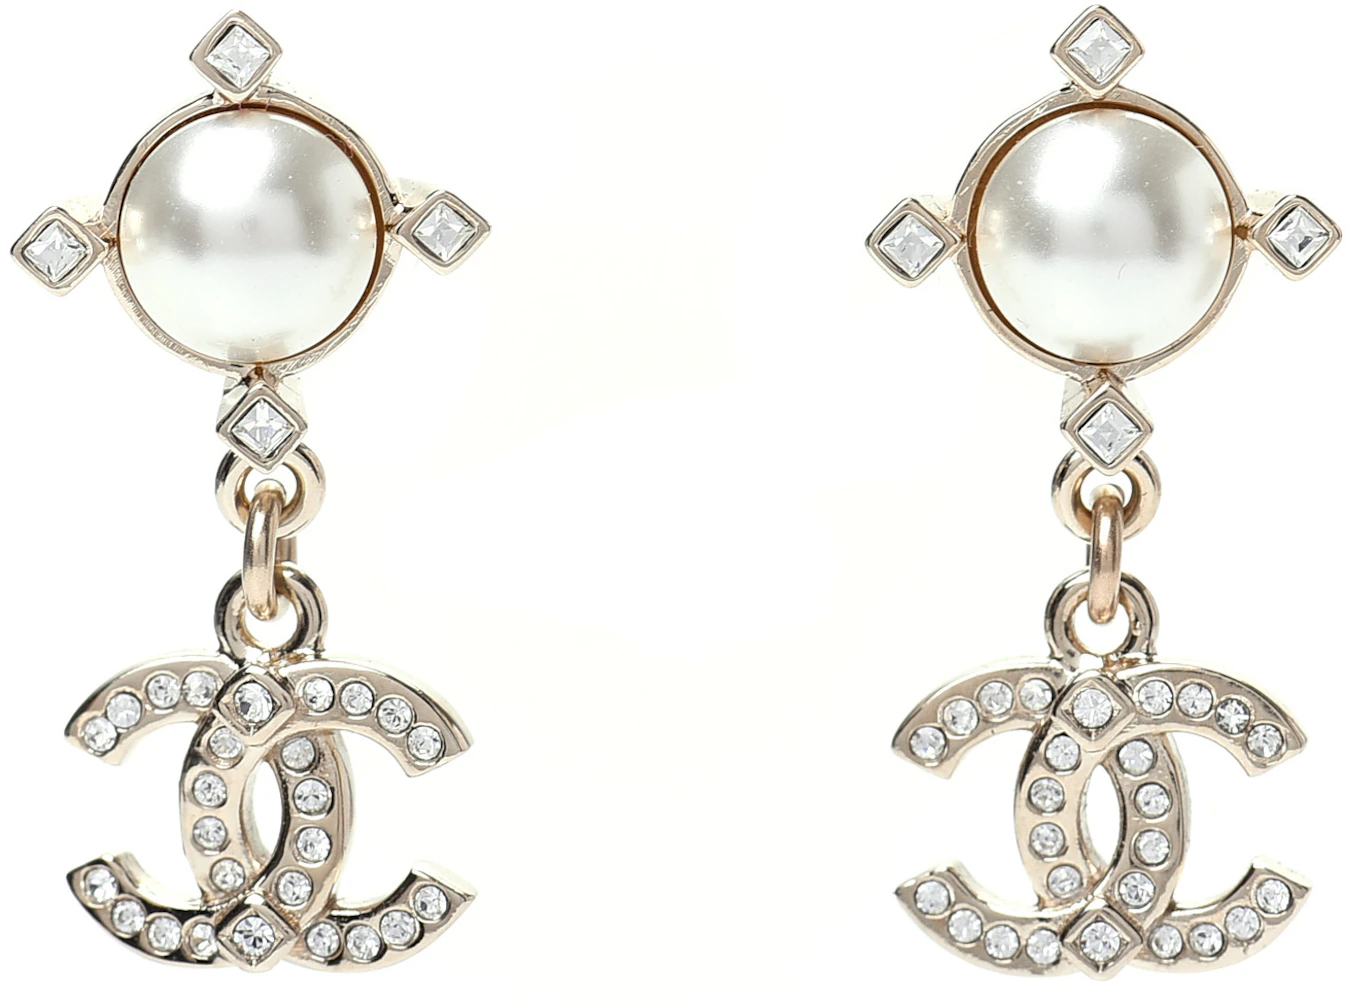 Chanel Earrings CC Crystal Drop Earrings with Pearl, Lightgold Hardware,  New in Box WA001